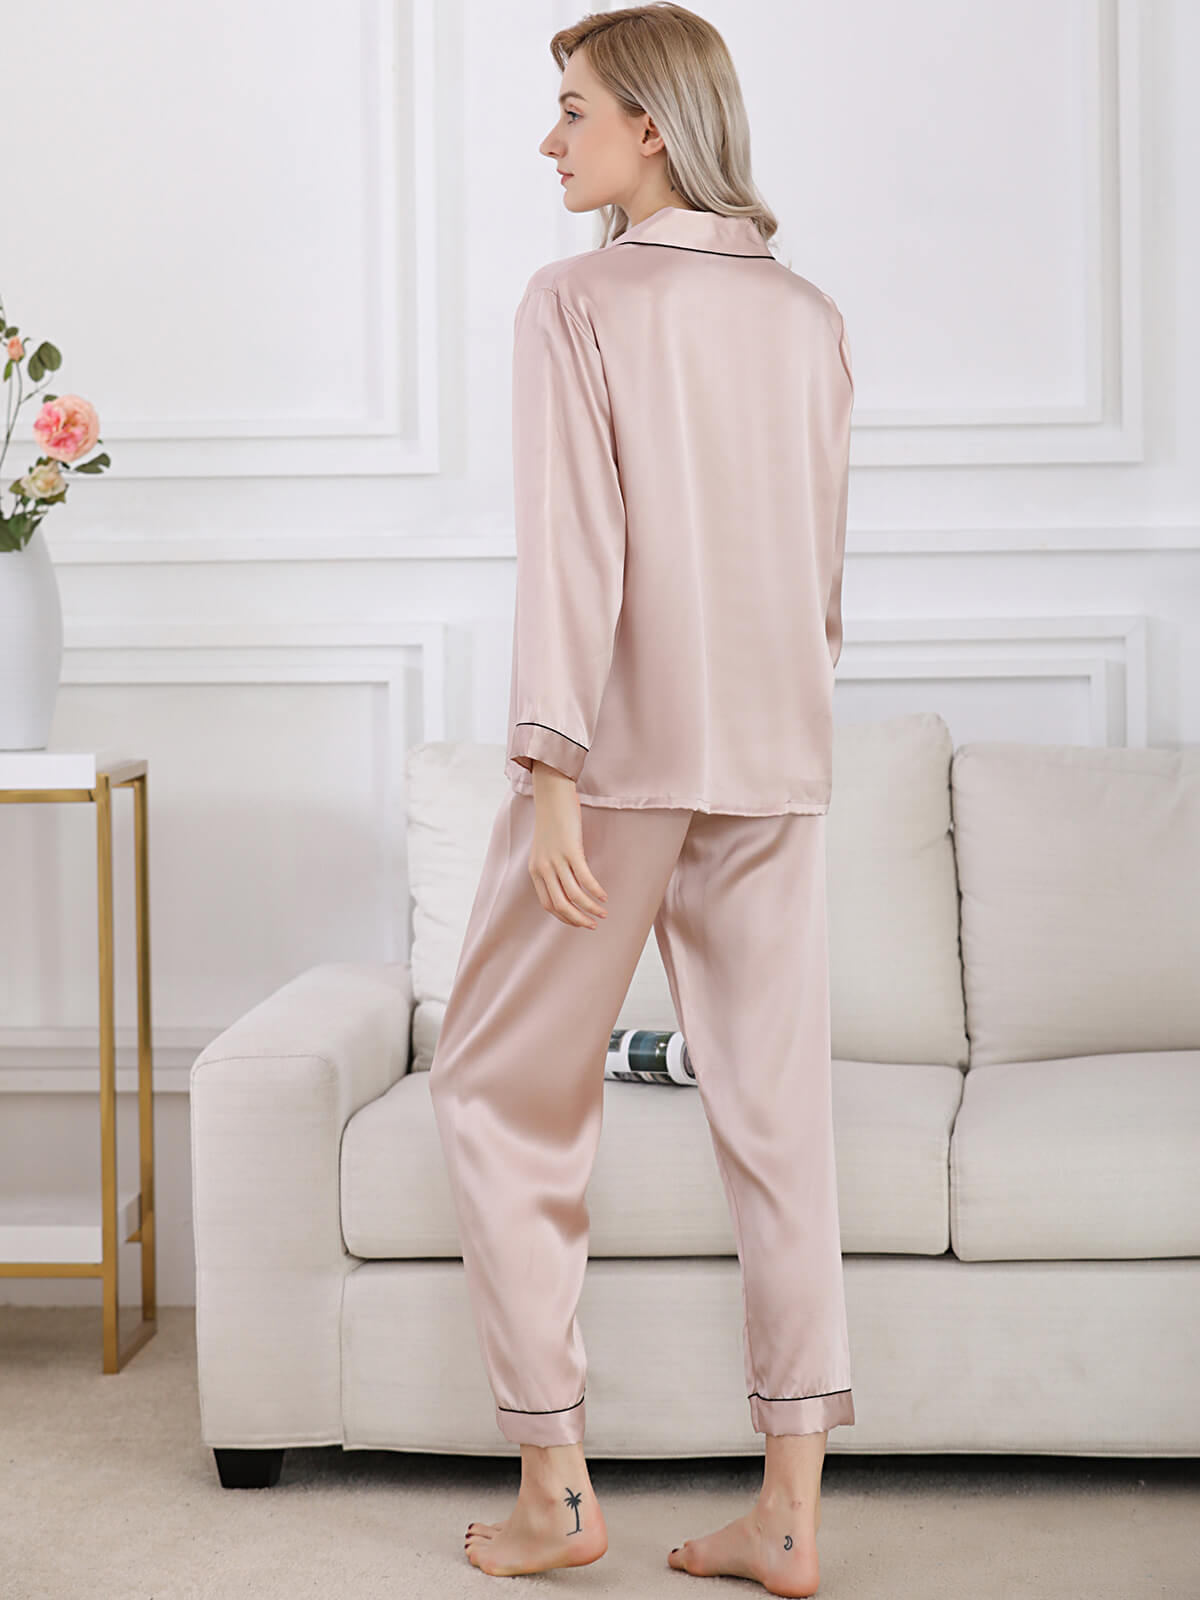 19 Momme Classic Trimmed Long Silk Pajama Set For Women